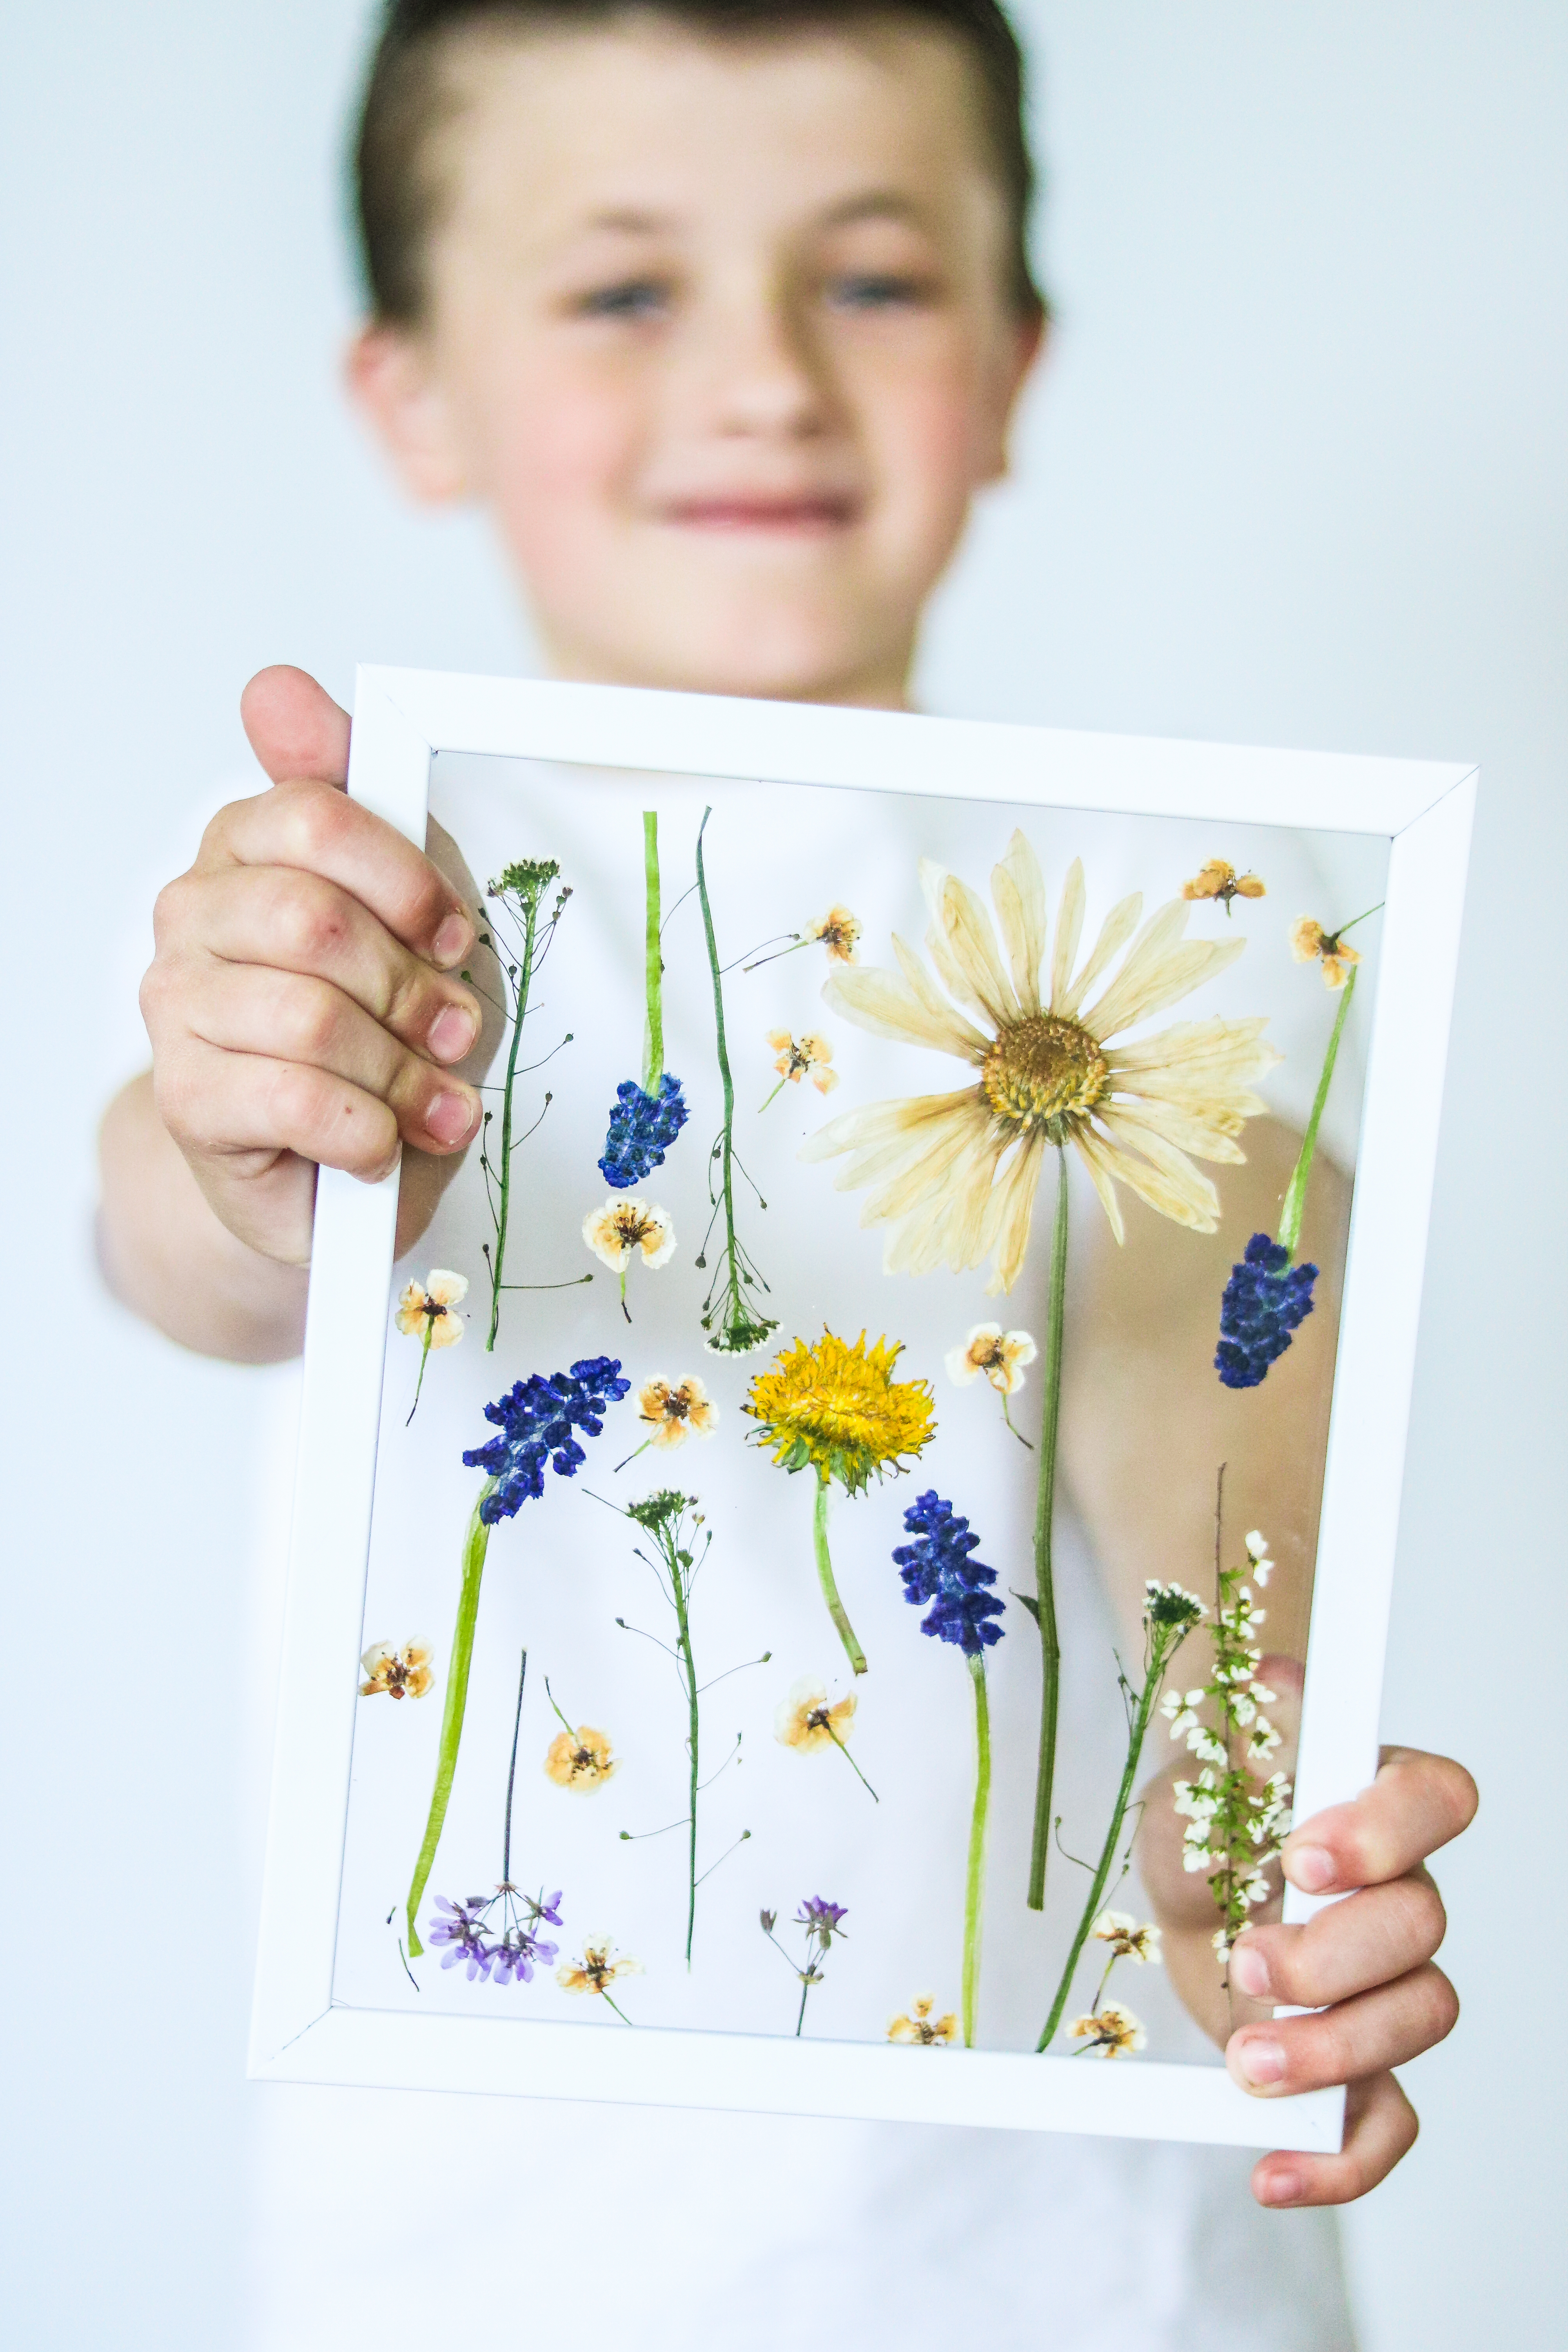 Pressed Flower Bookmarks Using Contact Paper: A Fun and Easy Craft for Kids